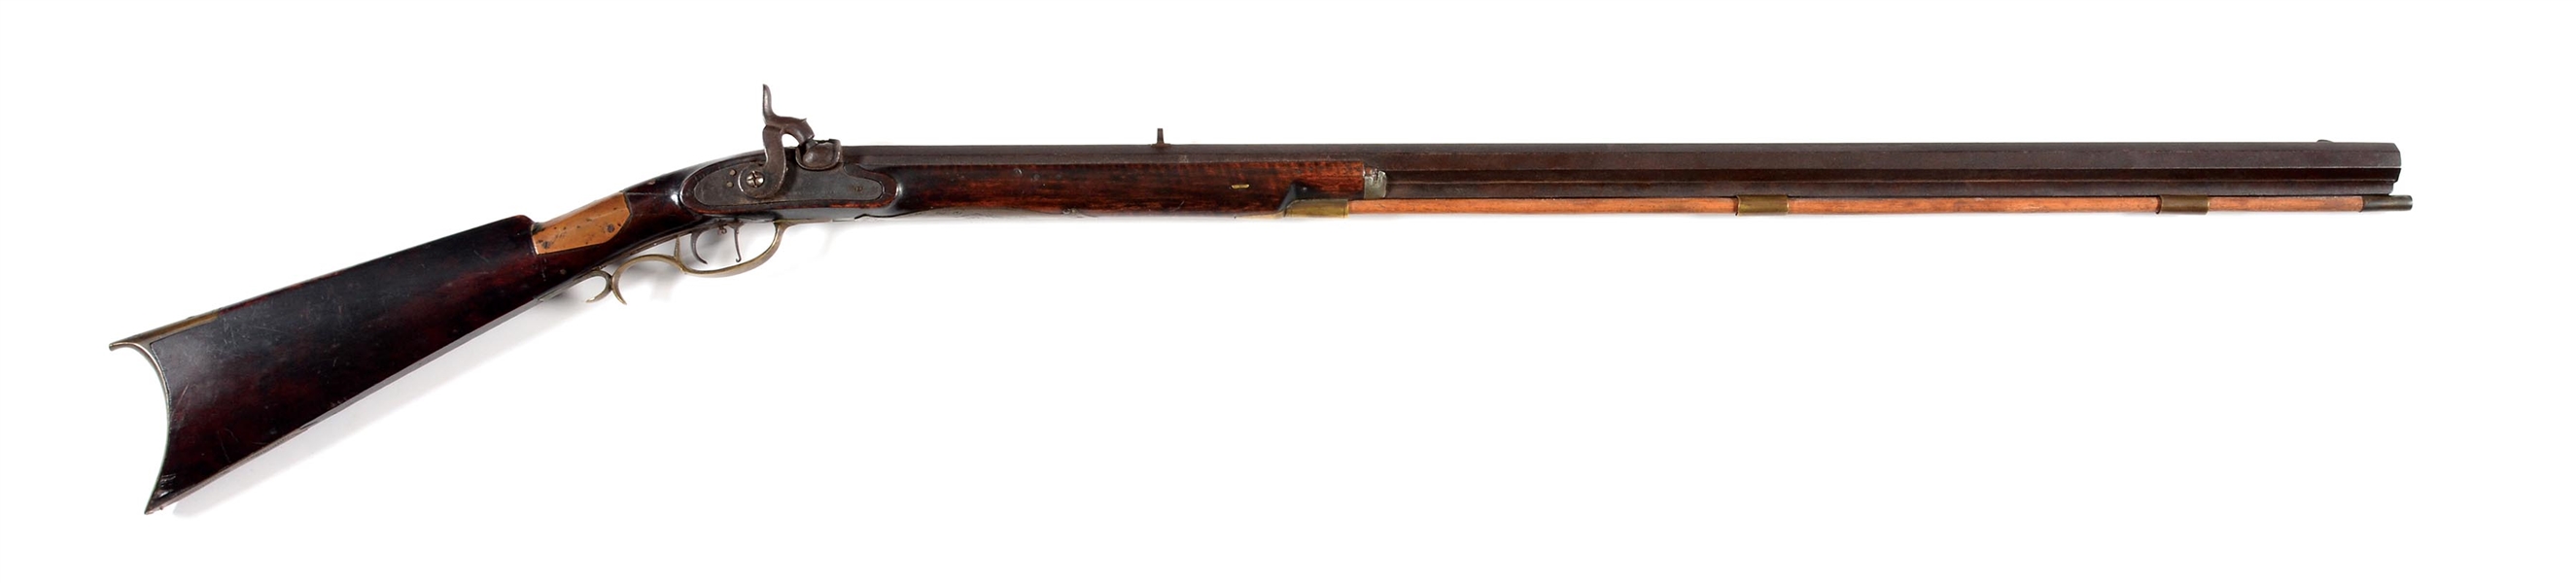 (A) PERCUSSION RIFLE WITH J.G PHILLIPS BARREL